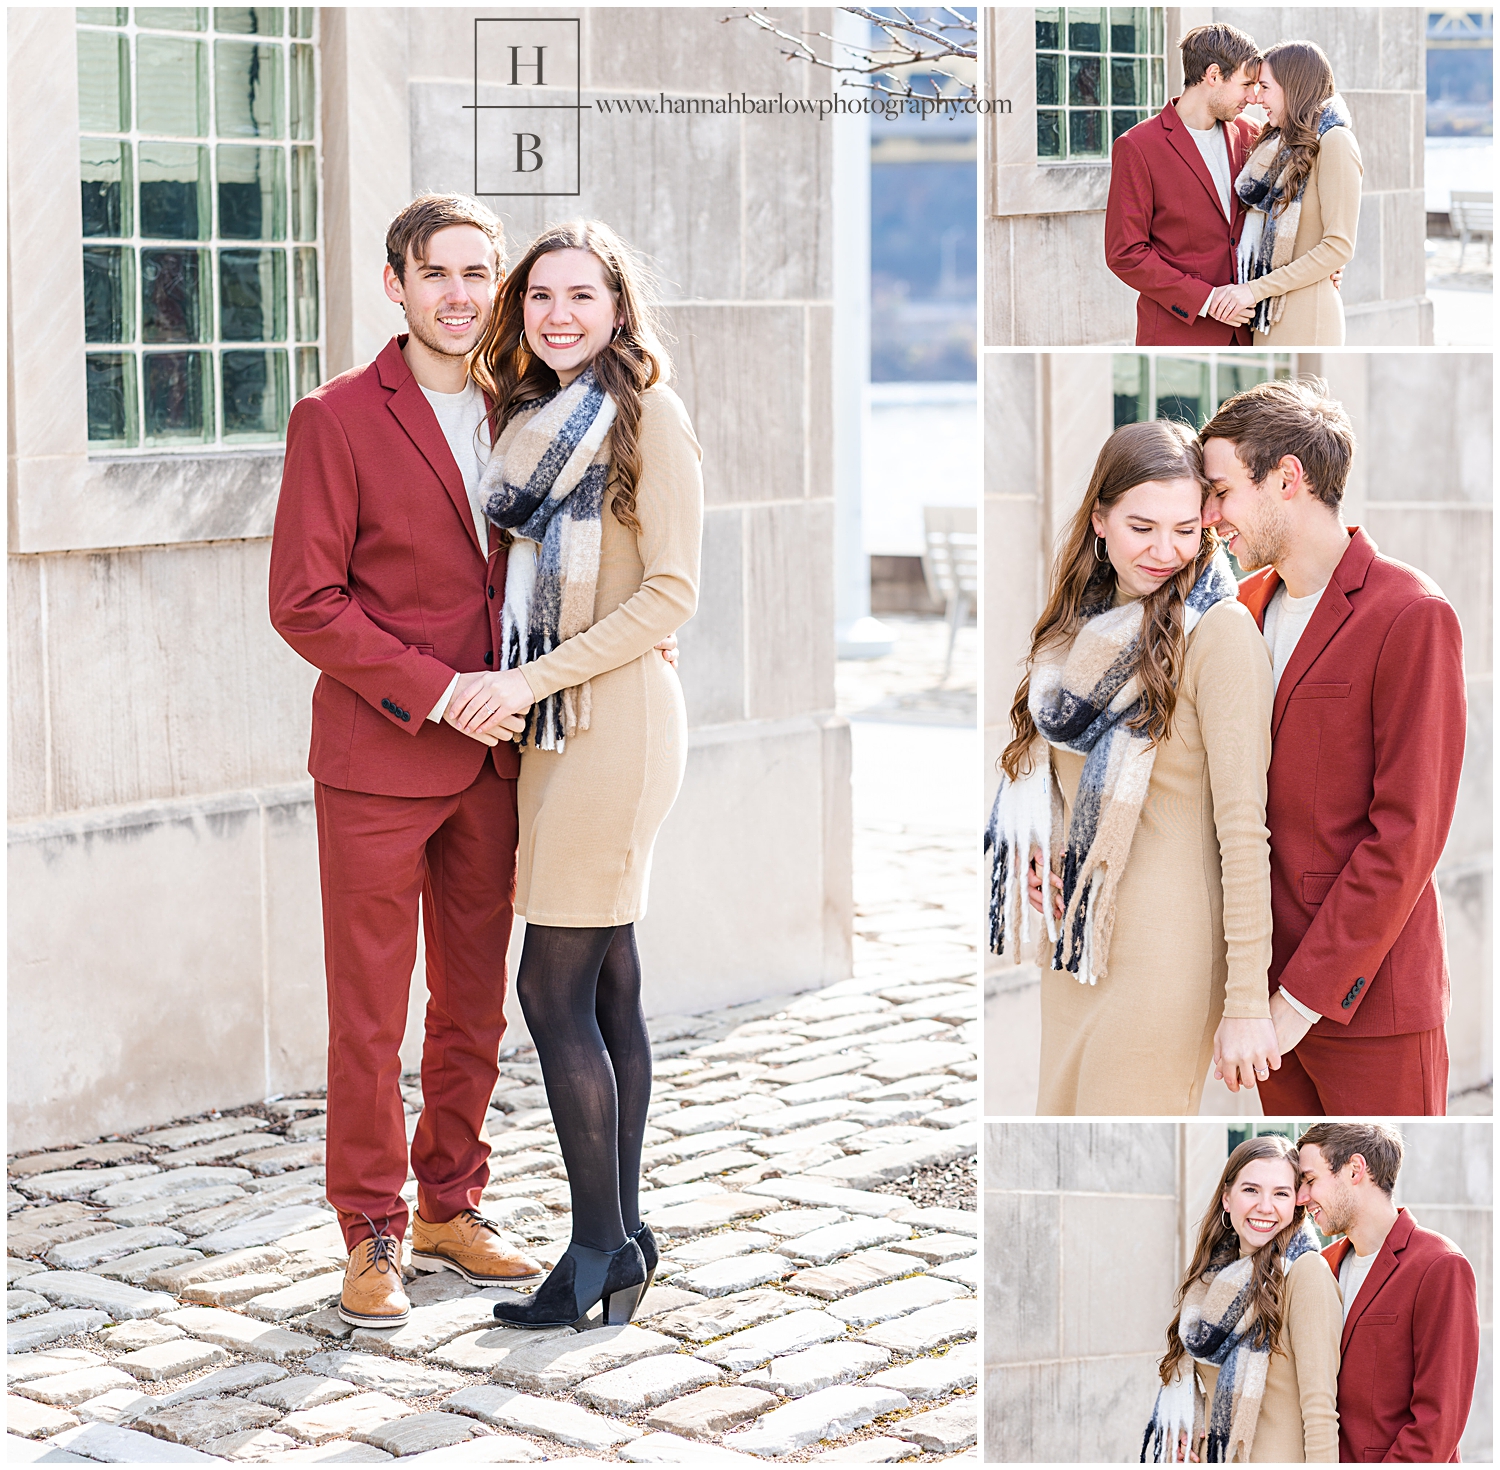 Man in red suit standing with fiance by stone wall.